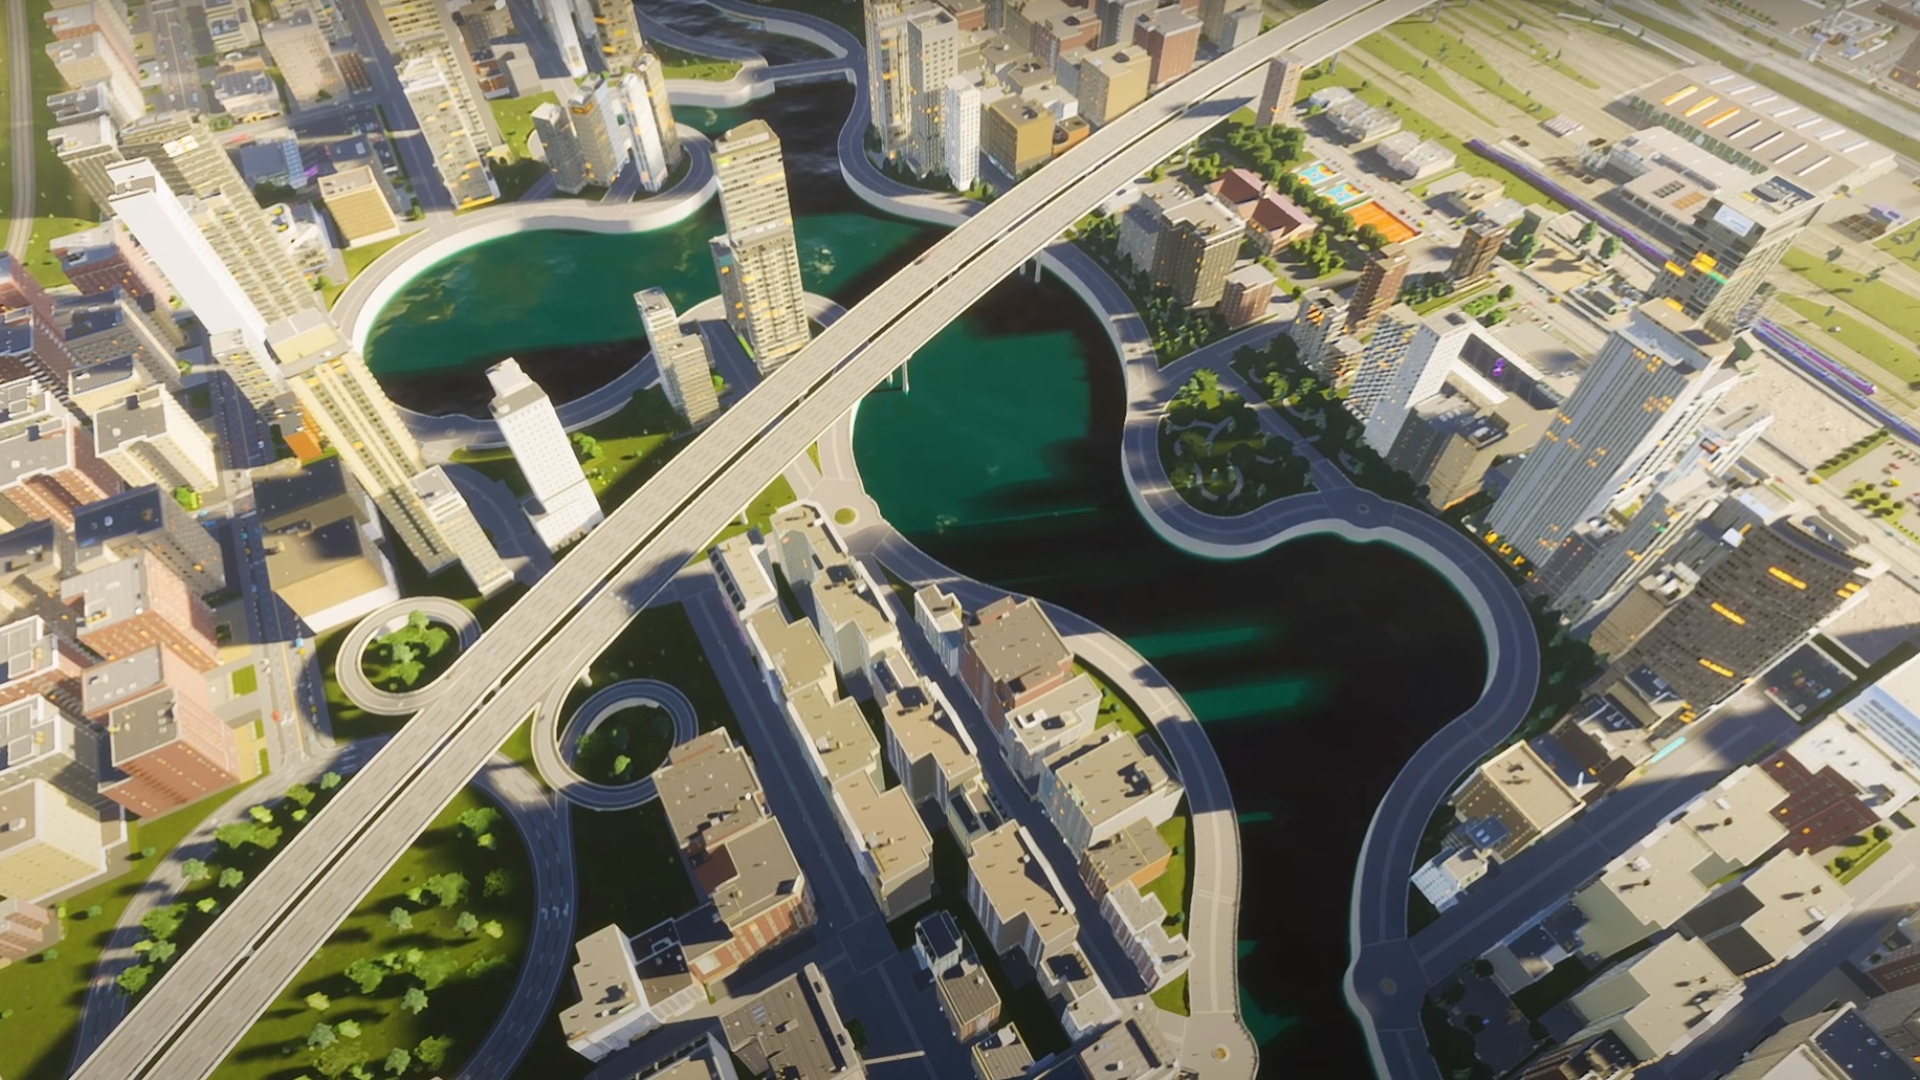 Cities: Skylines - Paradox Interactive Makes A SimCity